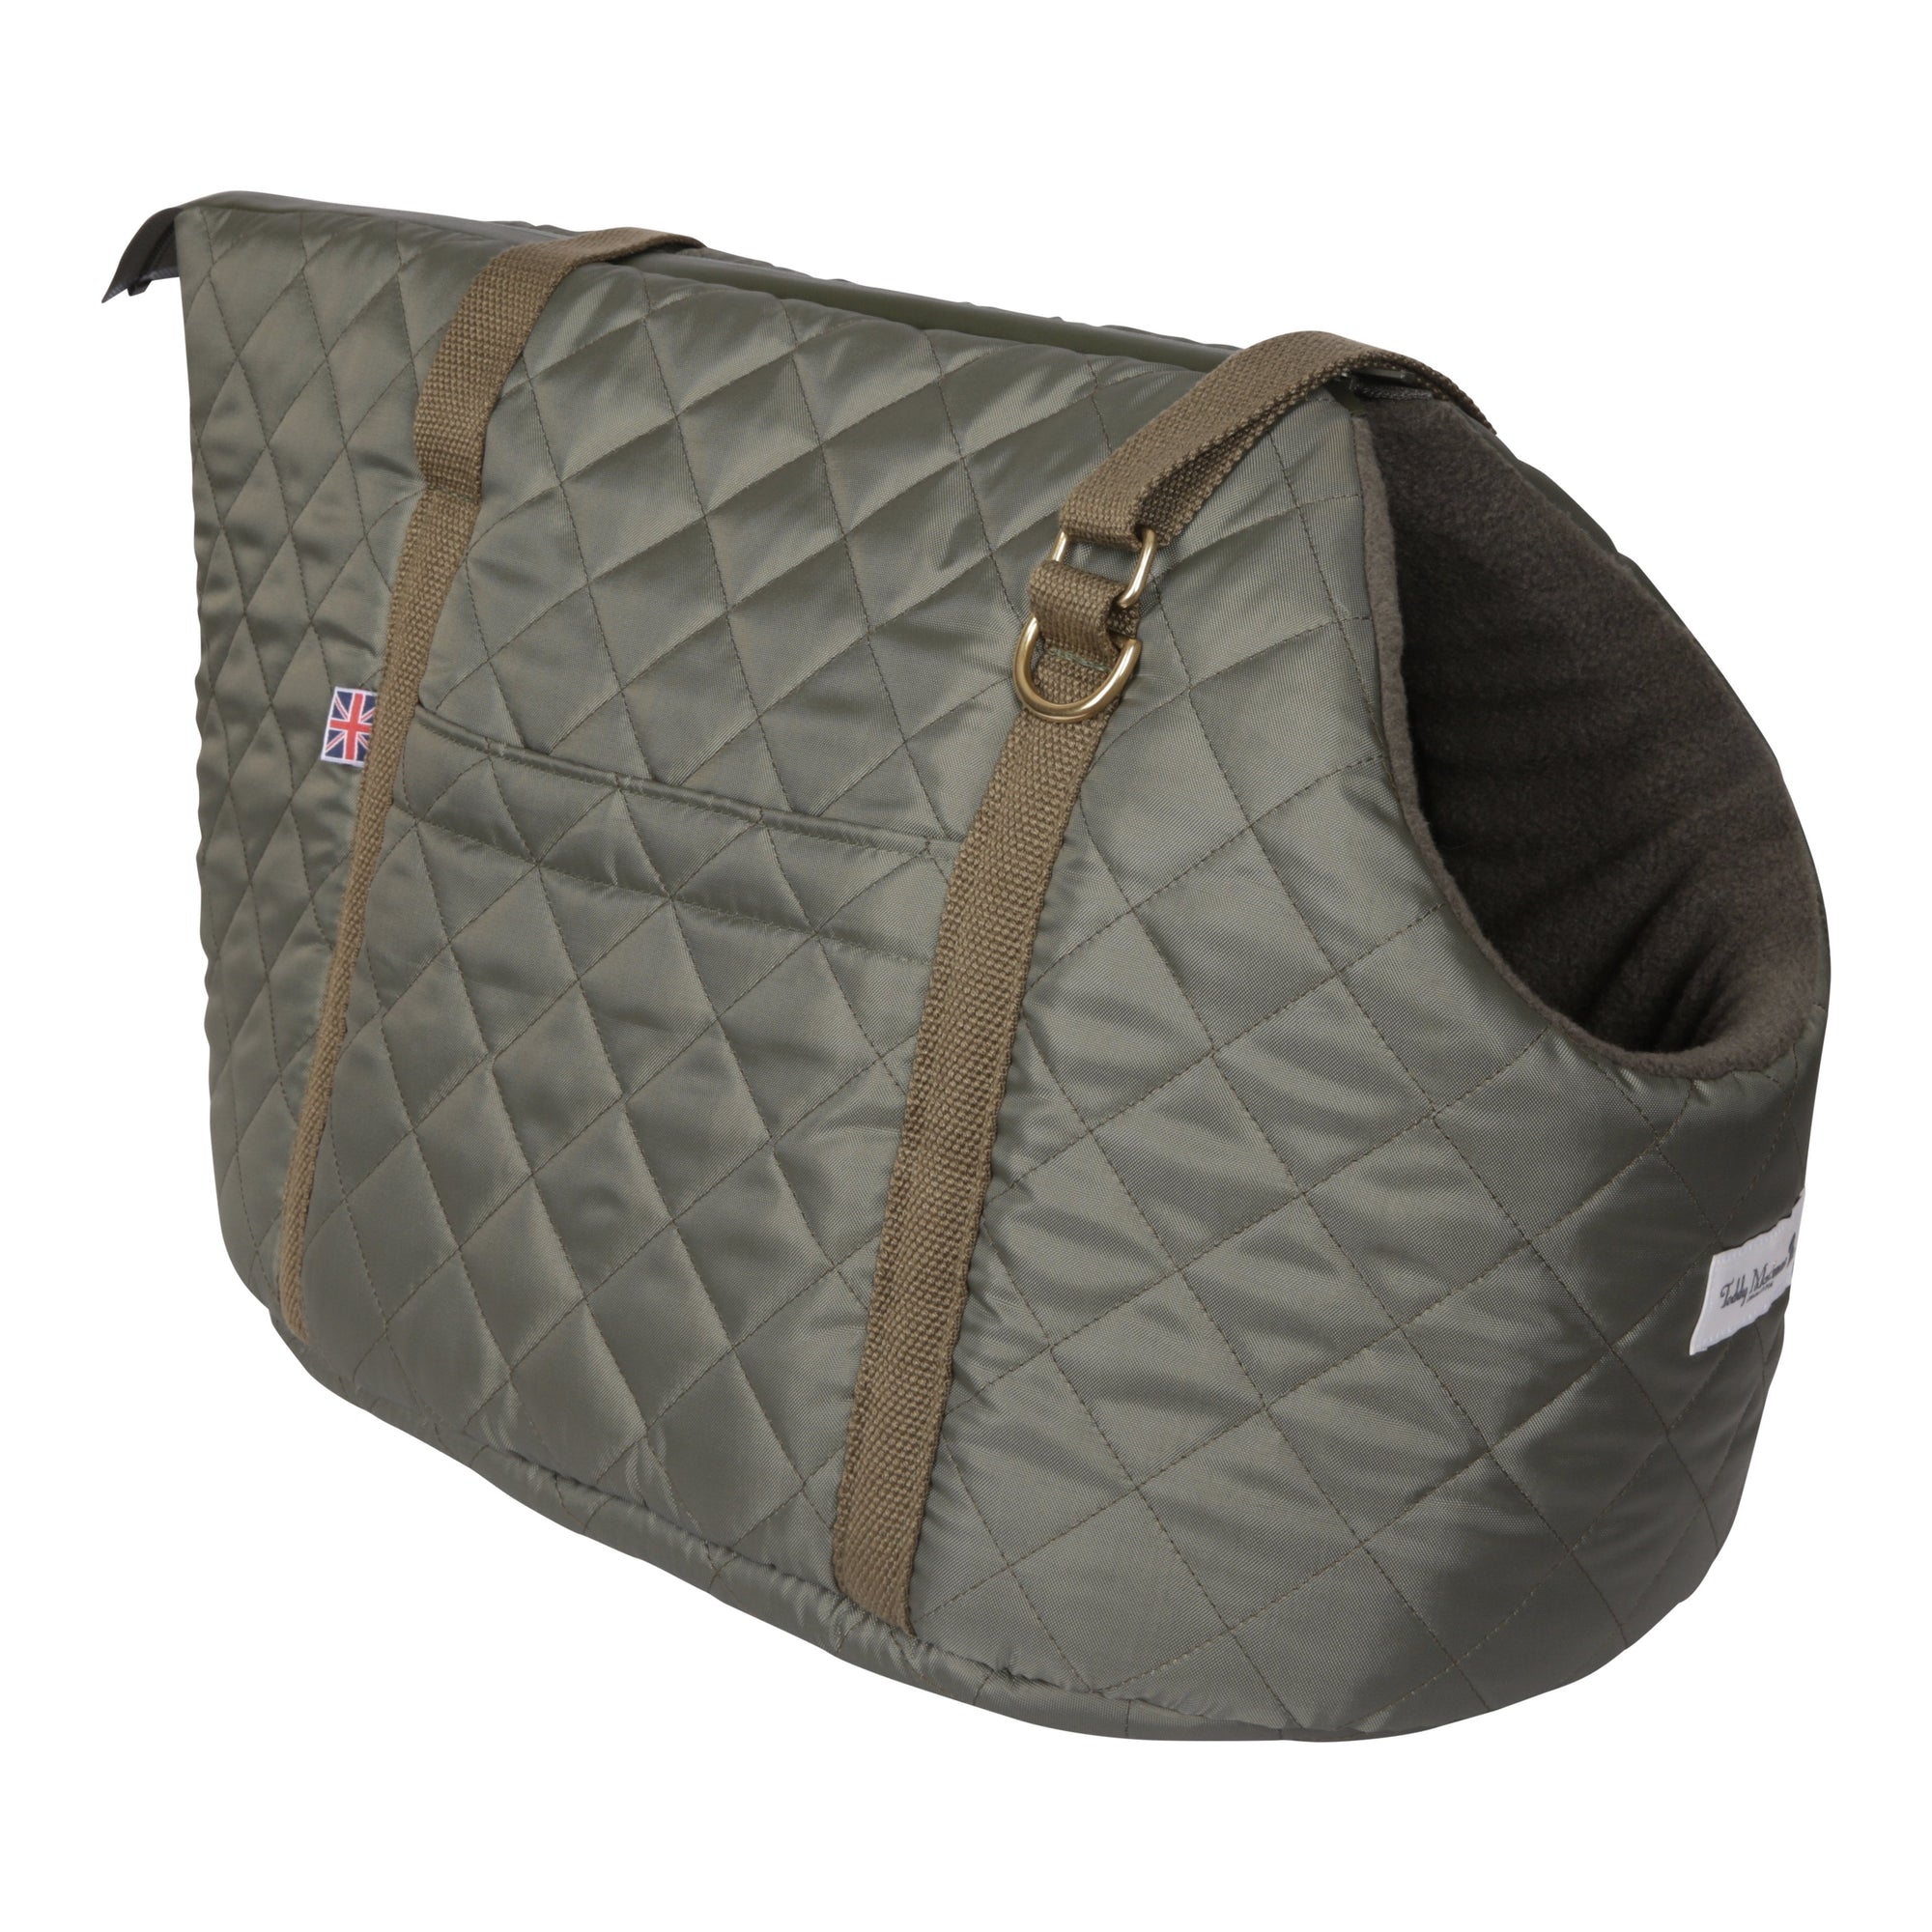 'The Explorer' Quilted Comfort Dog Carrier NEW!!